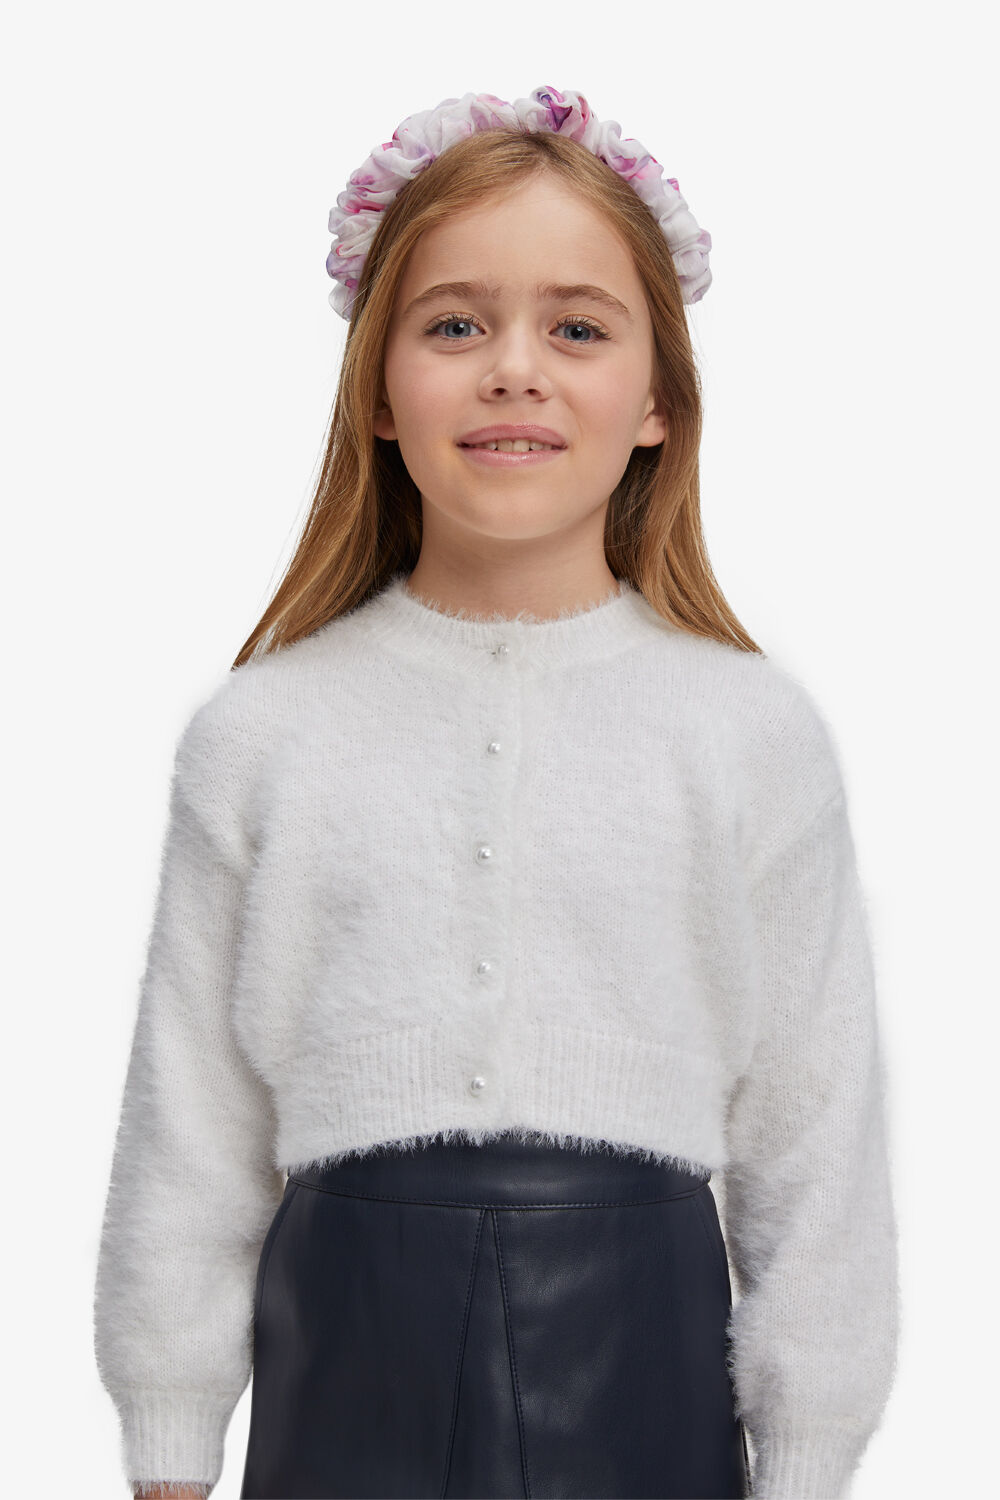 GIRLS HALEY SCRUNCH HEAD BAND in colour PINK CARNATION